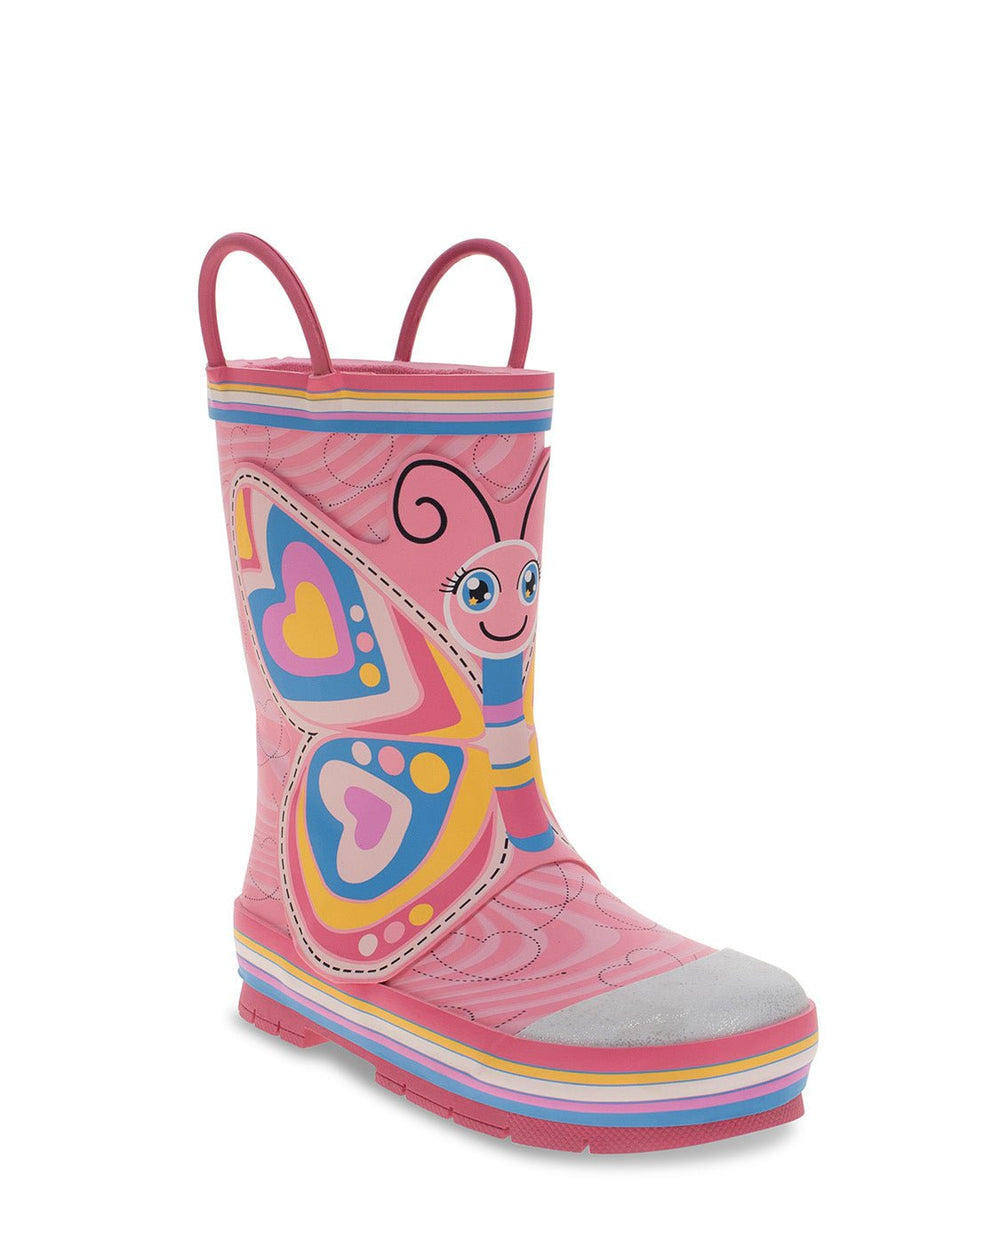 New! Bella Butterfly Rain Boot - Pink - Western Chief